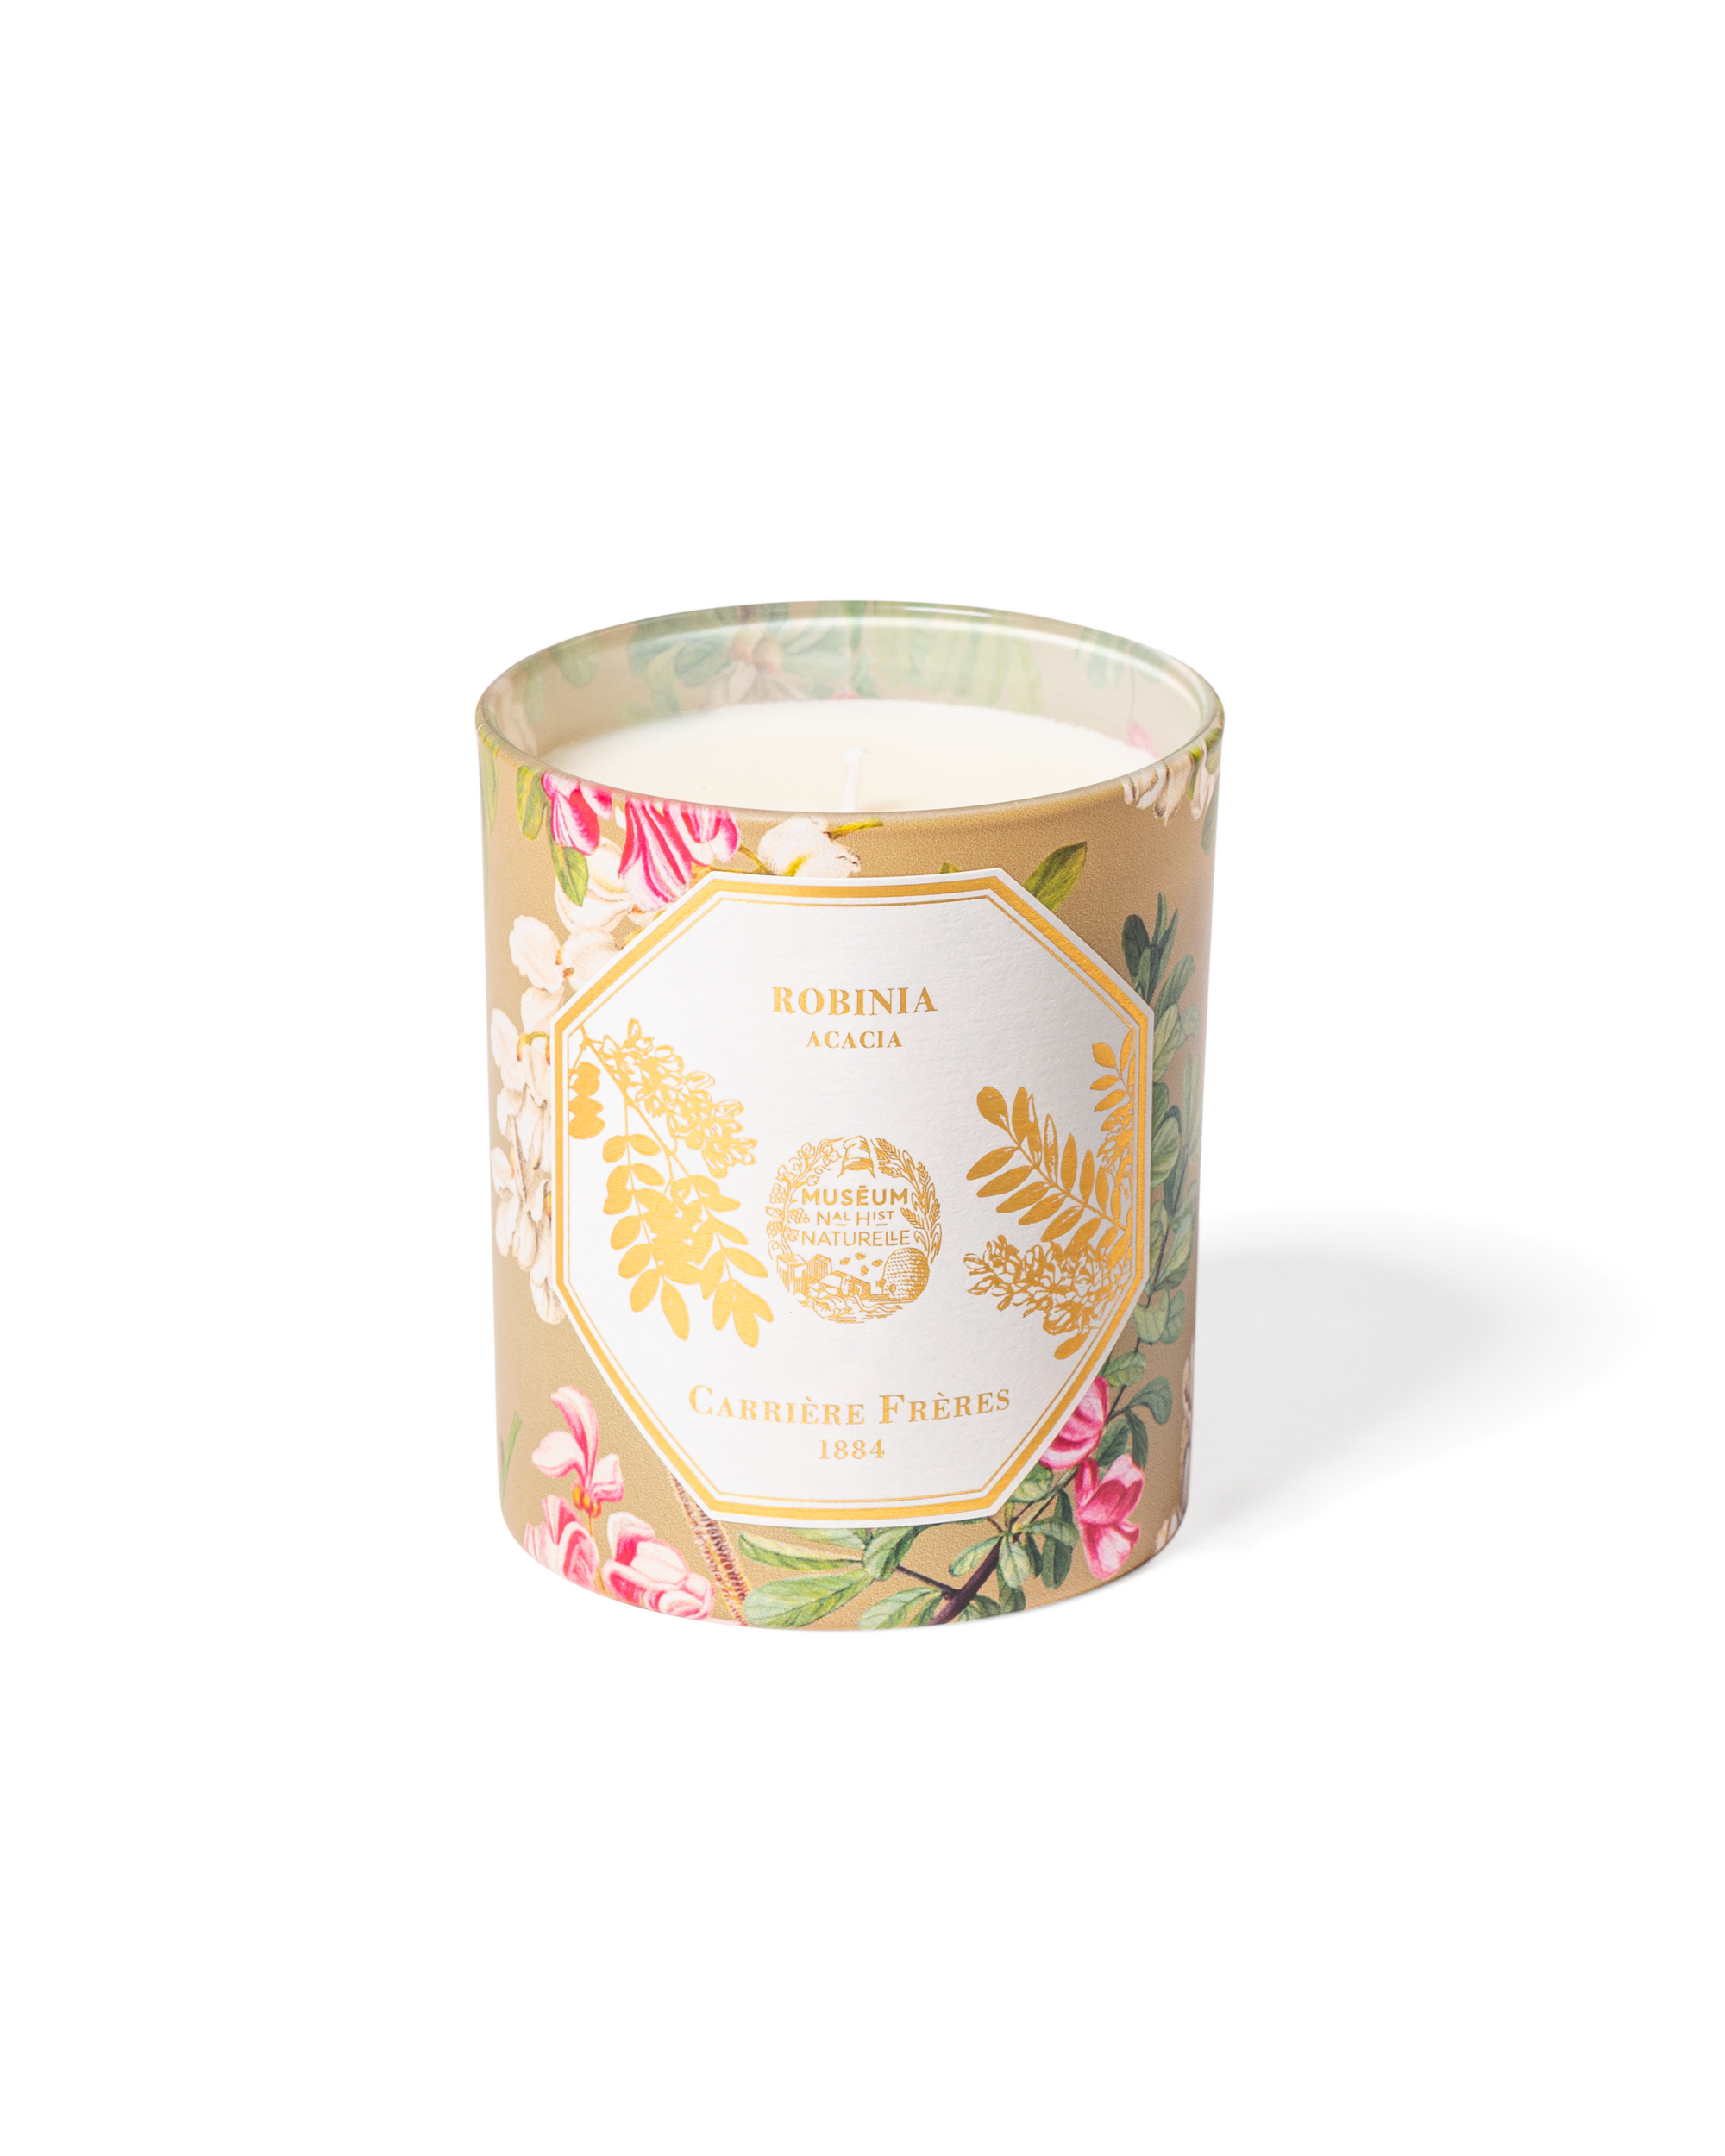 Carriere Freres Acacia Robinia Scented Candle